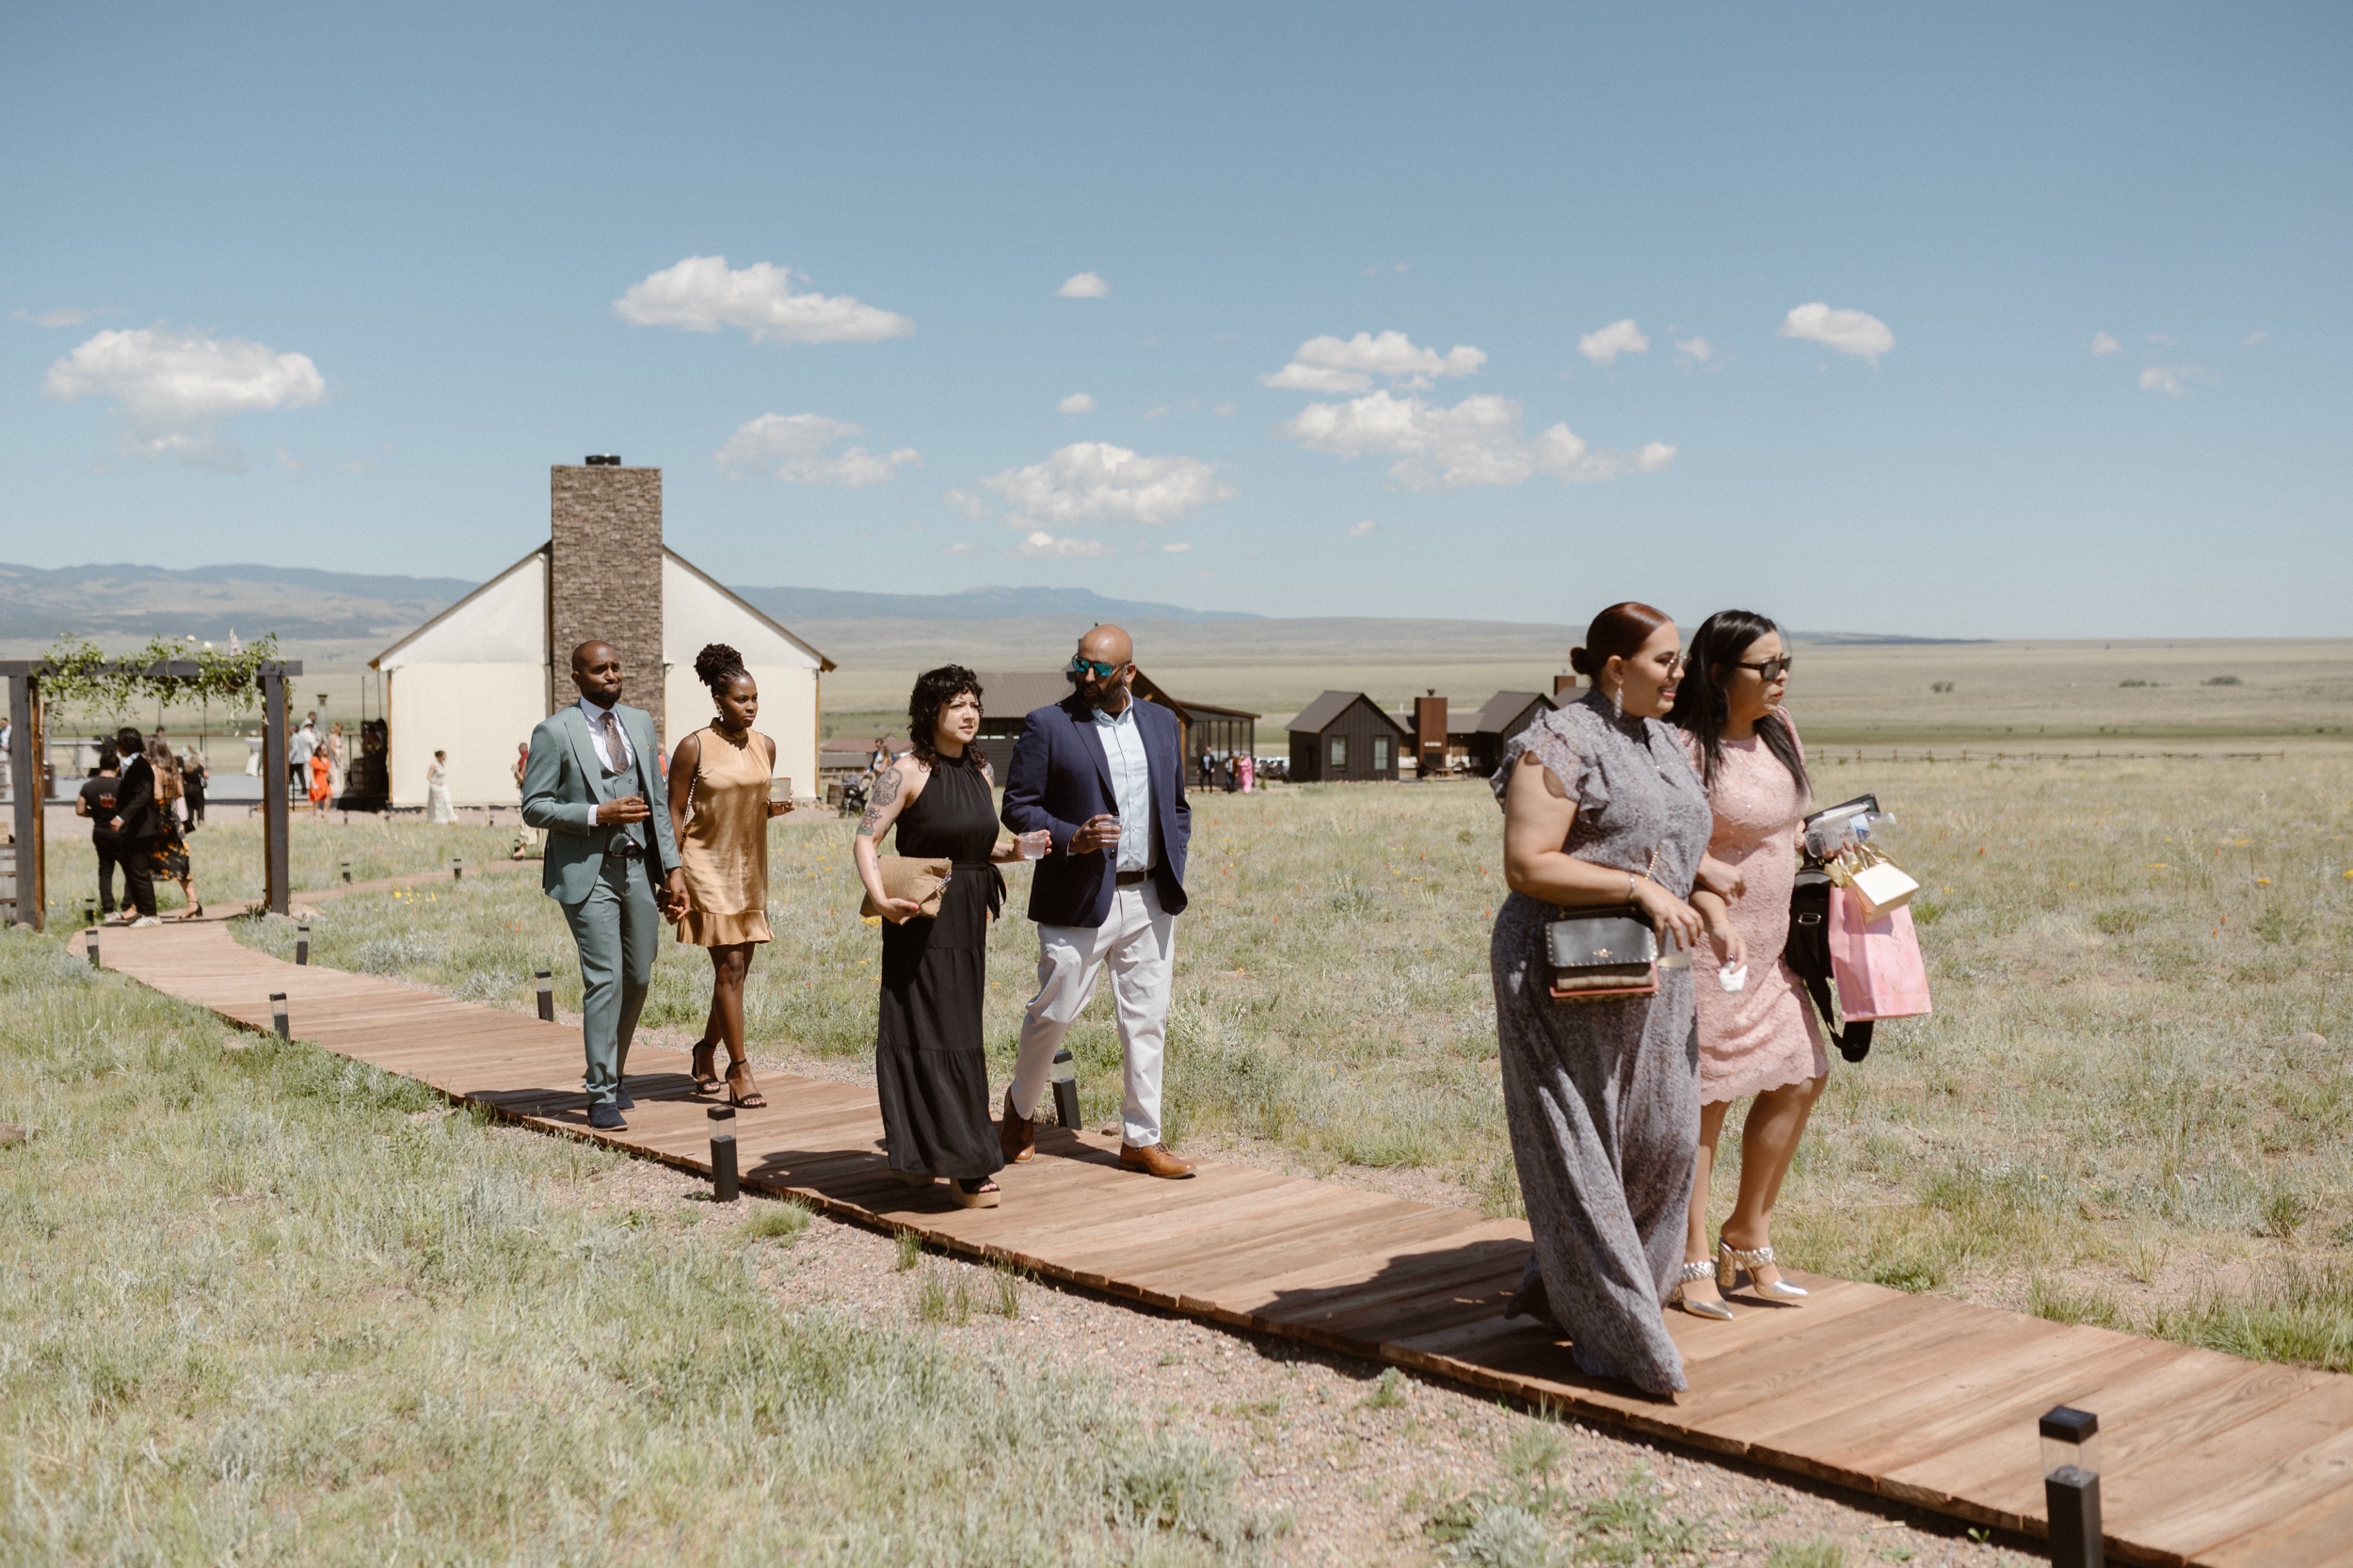 Wedding guests walking along a wooden path to find their seats for the wedding ceremony at Three Peaks Ranch. Photo by Colorado wedding photographer Ashley Joyce.